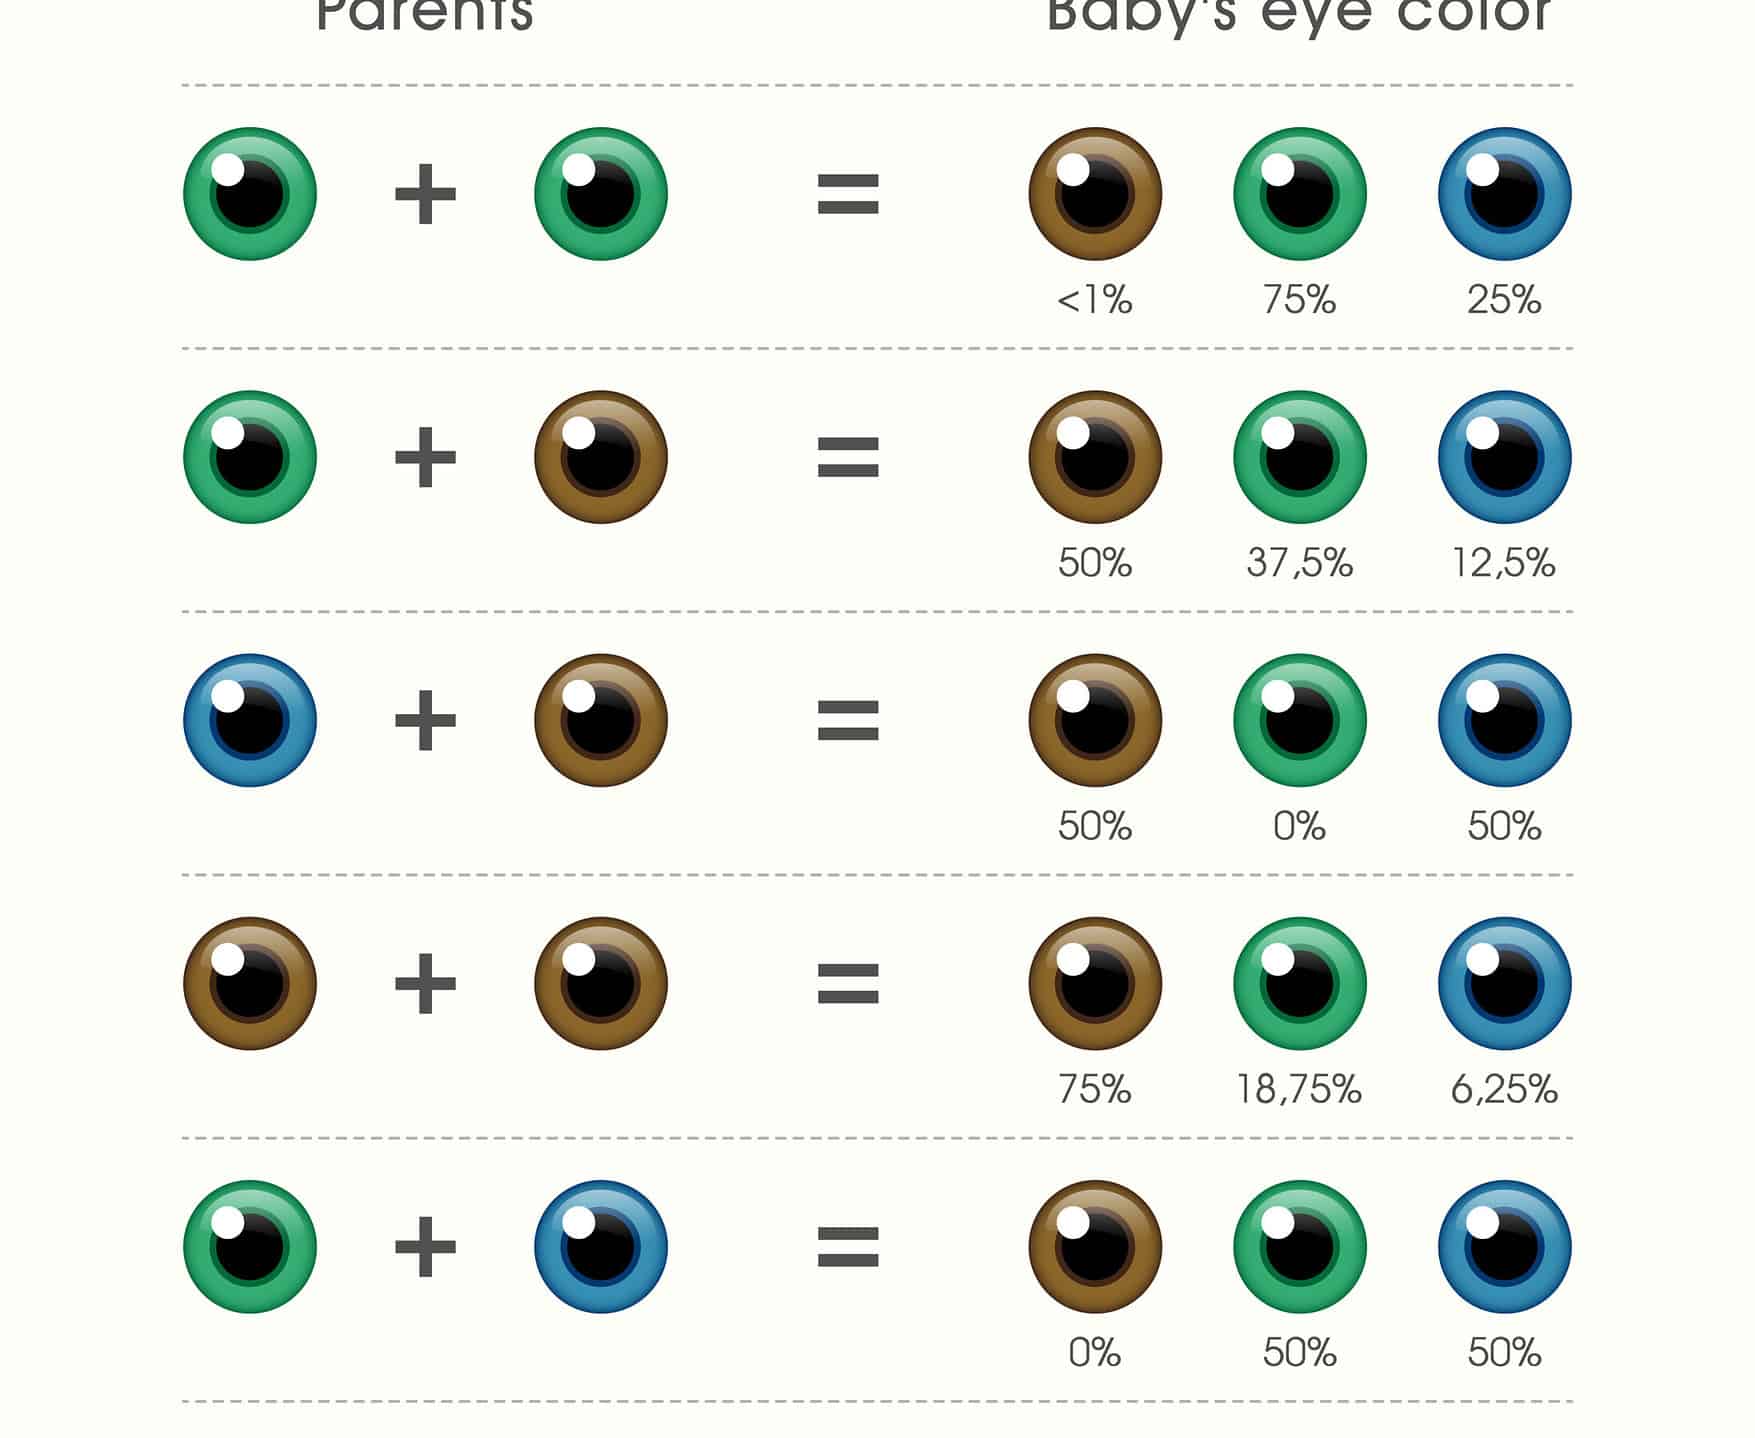 Eye Color Chart: What Color Eyes Will Your Baby Have?